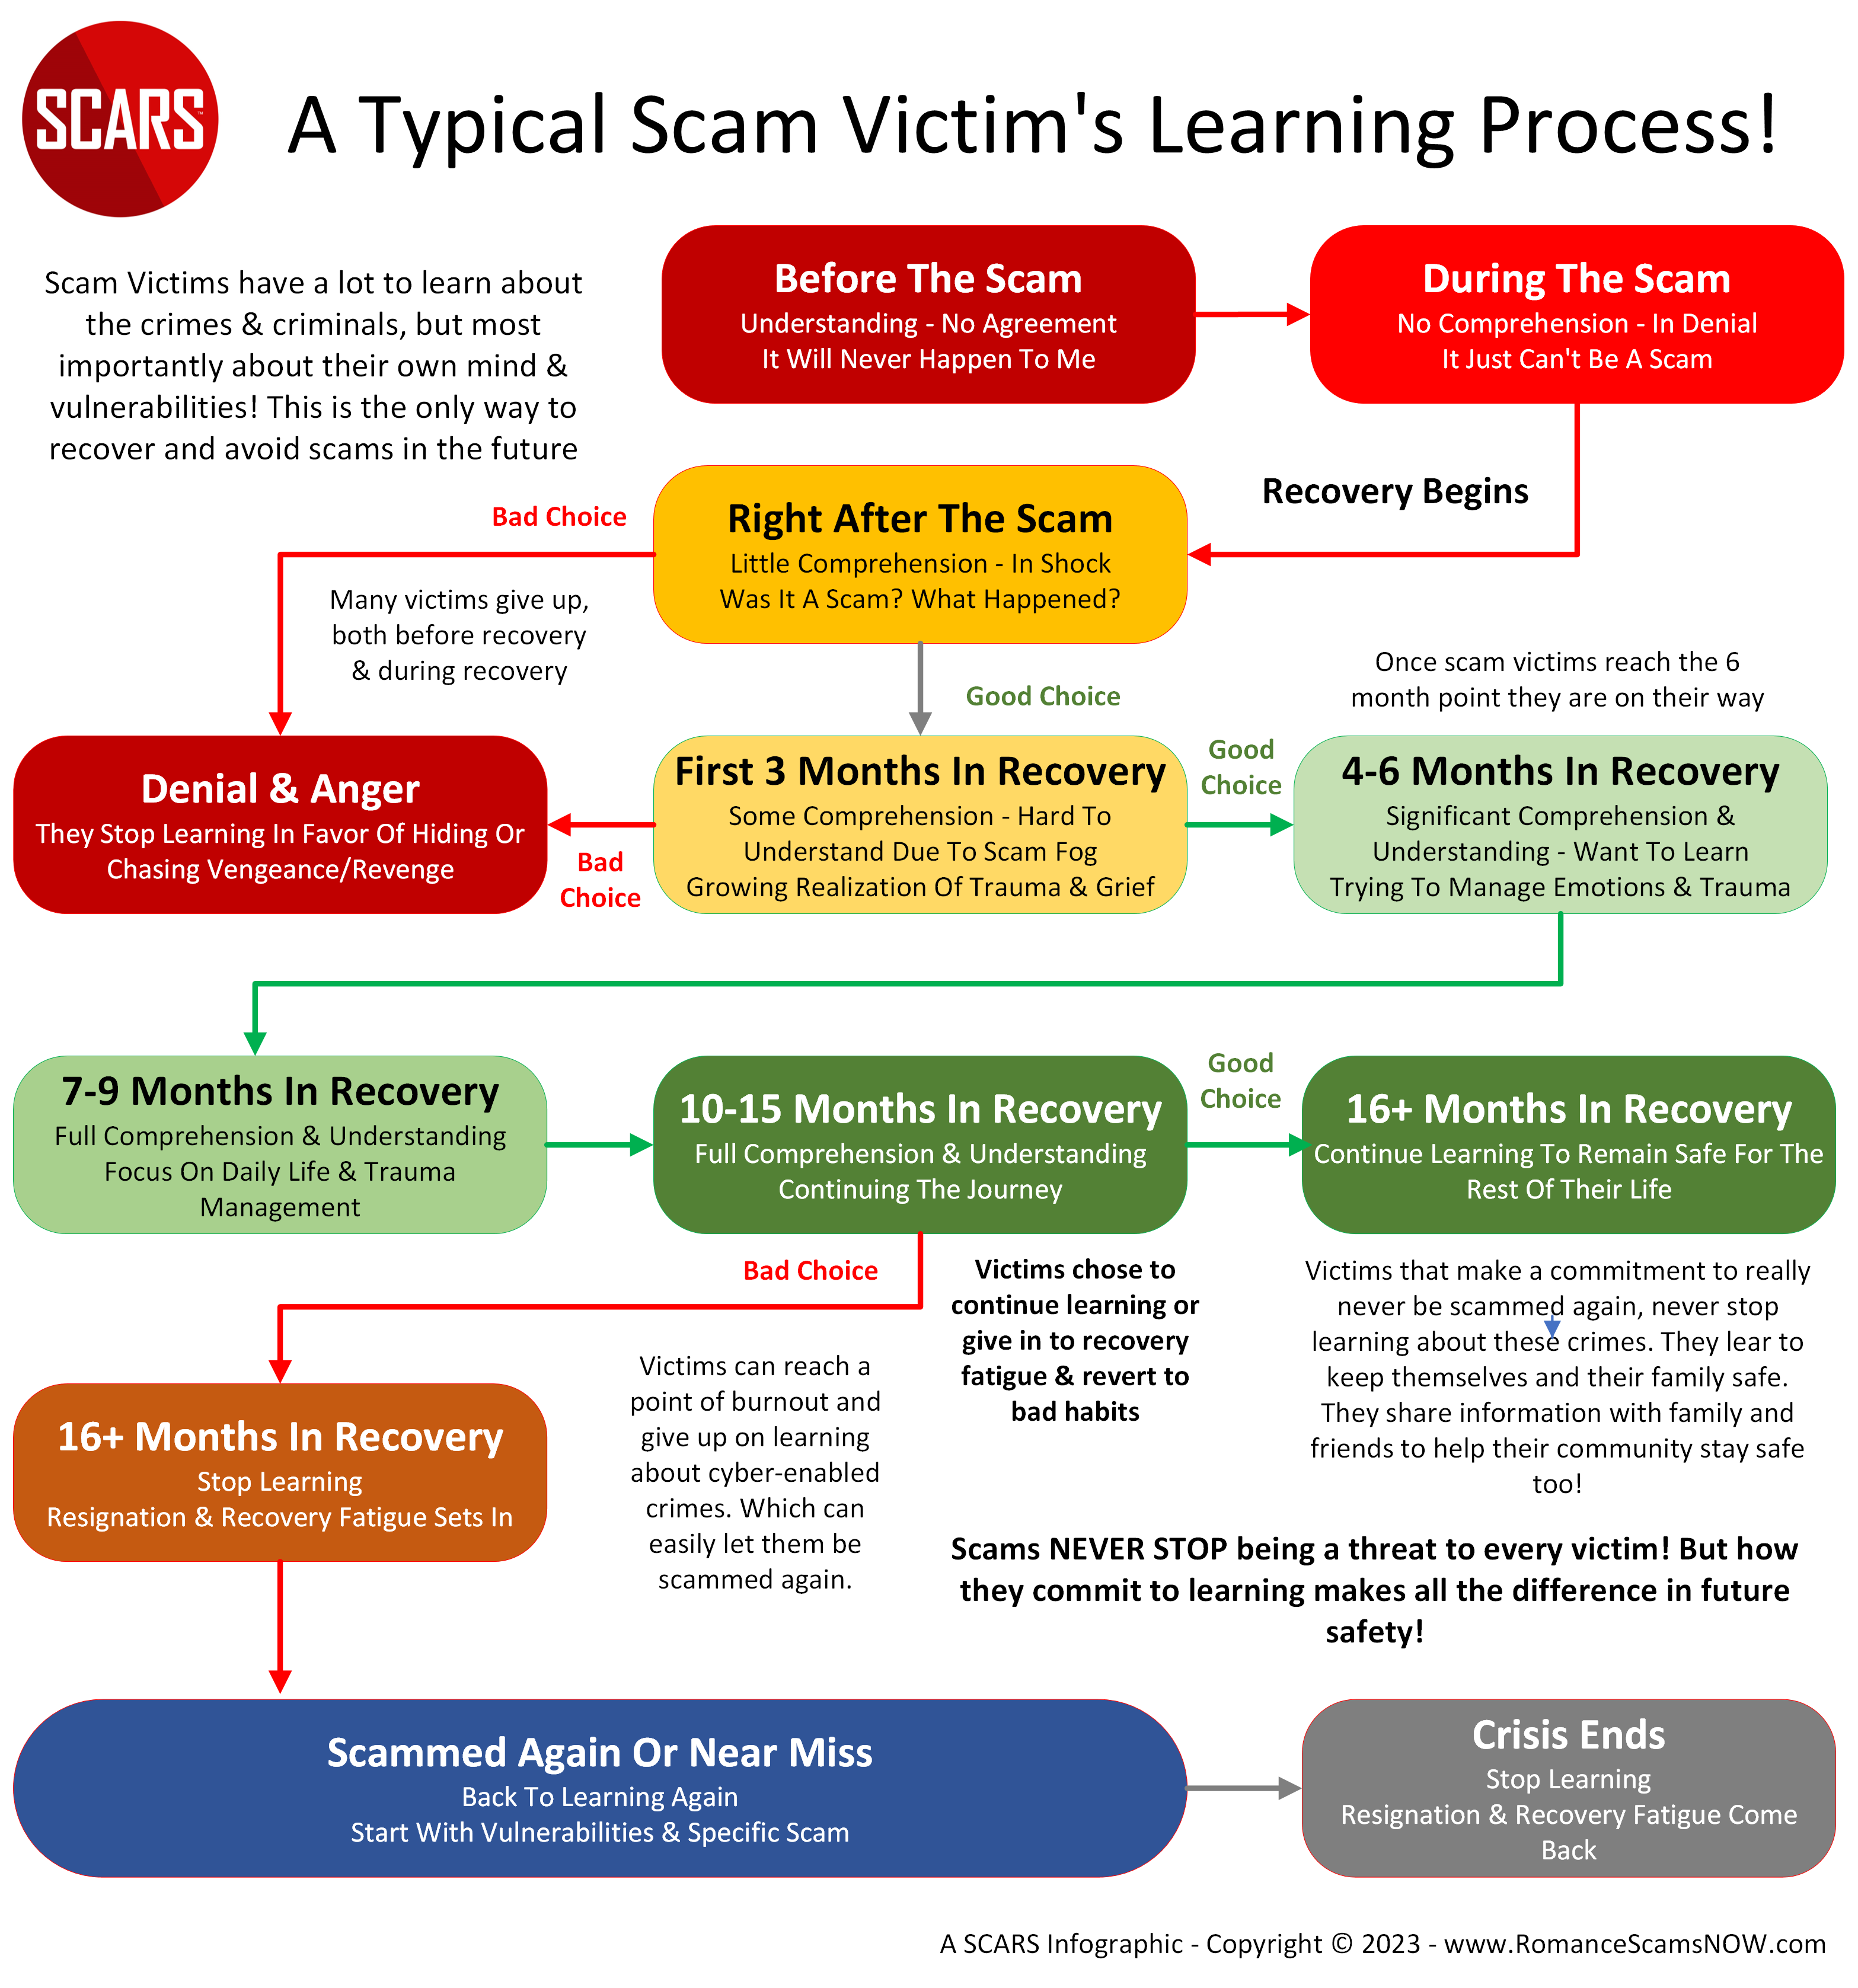 A Typical Scam Victim's Learning Process - a SCARS Infographic on RomanceScamsNOW.com